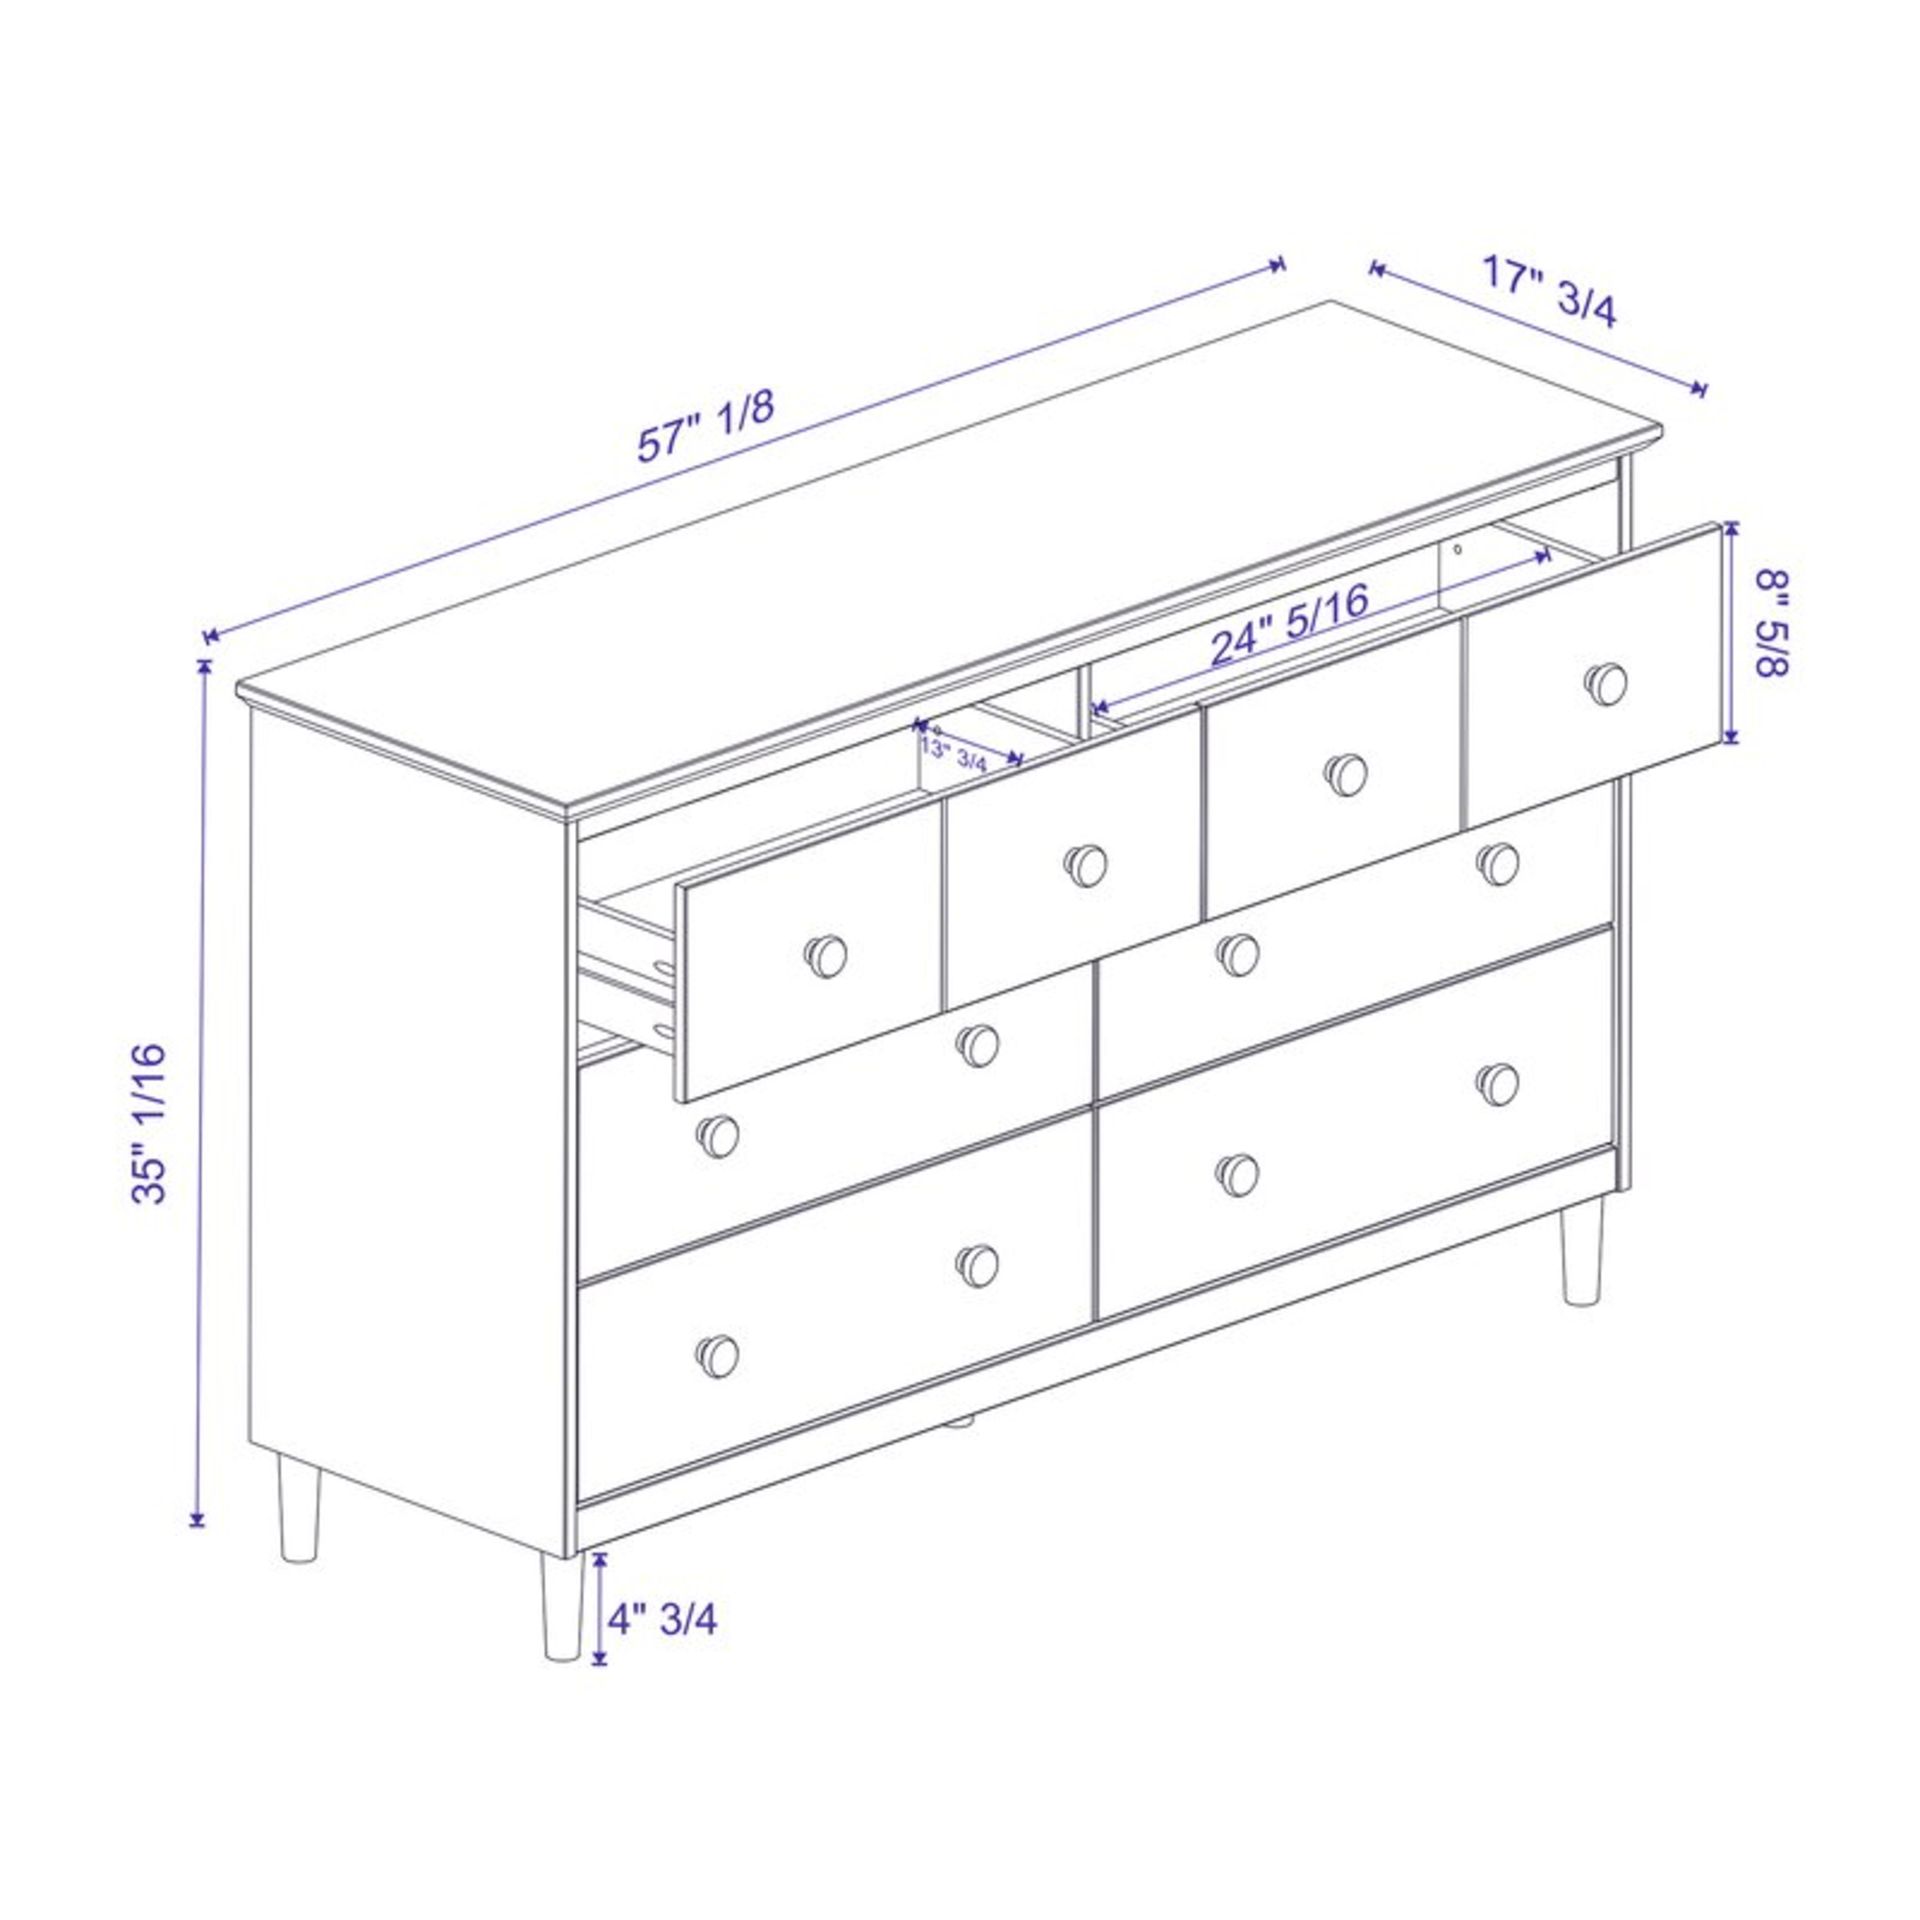 Tylor 6 Drawer Chest - RRP £386.99 - Image 4 of 4